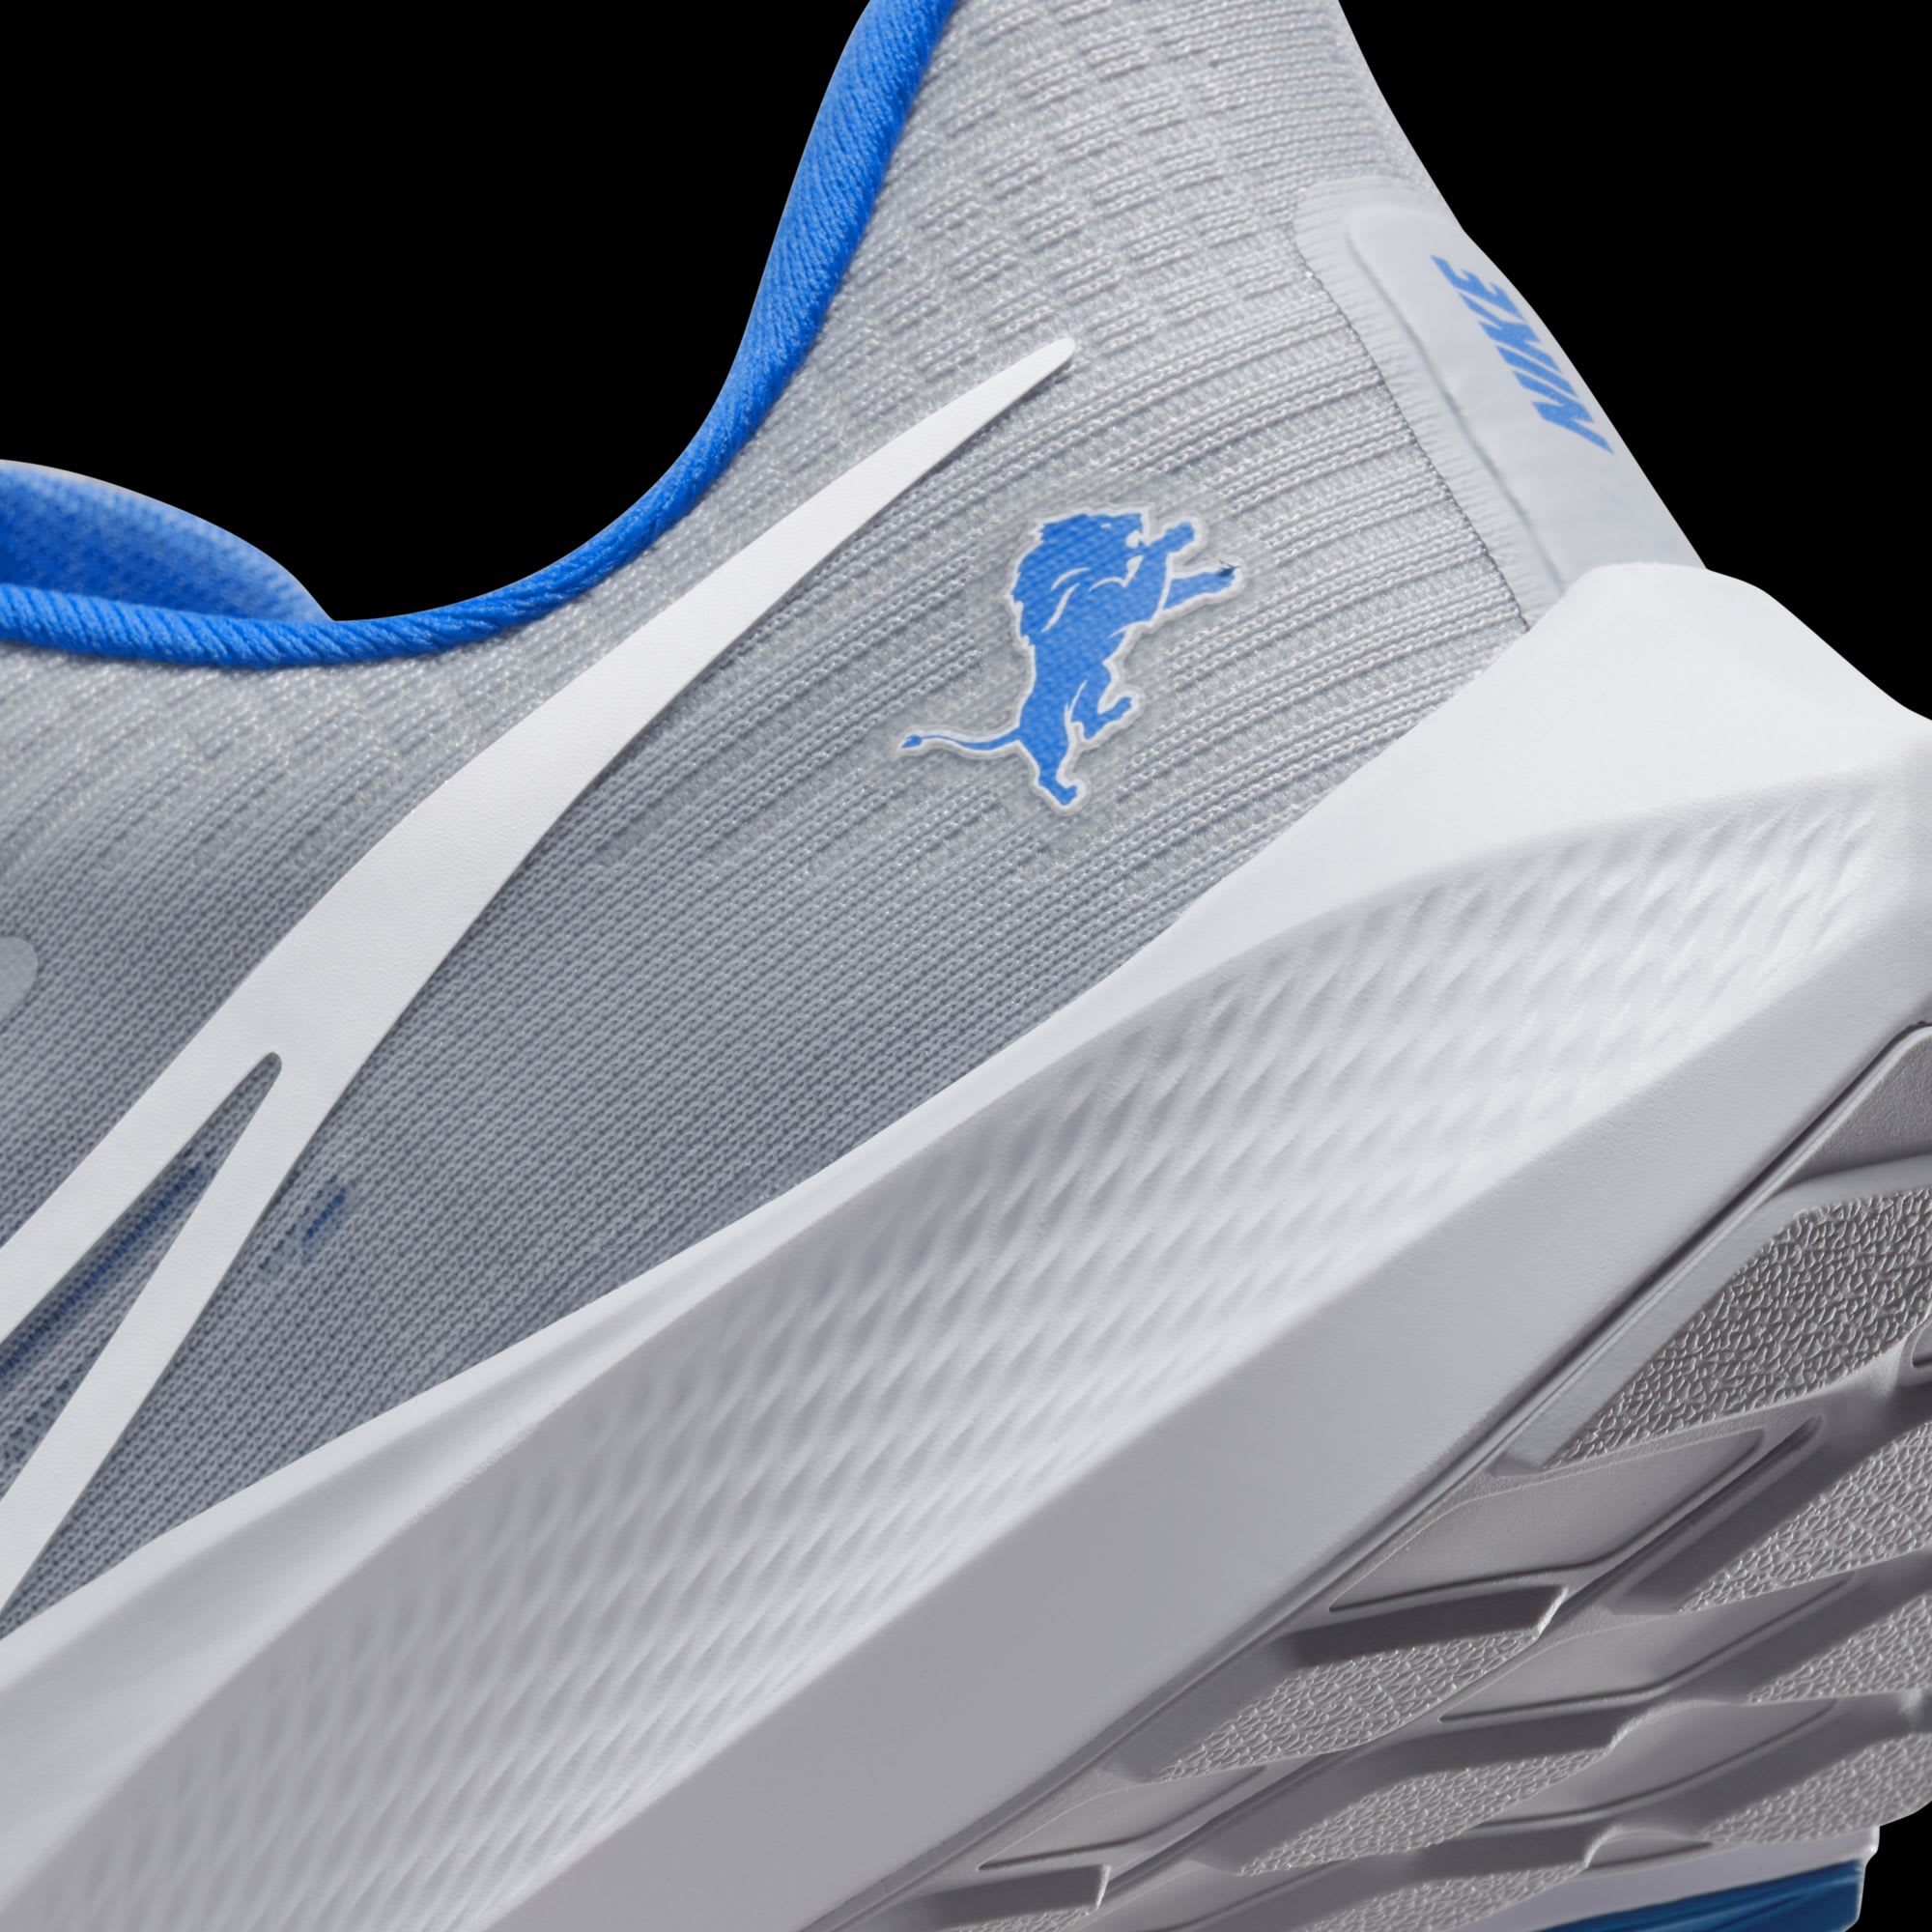 Fans need these Detroit Lions shoes by Nike